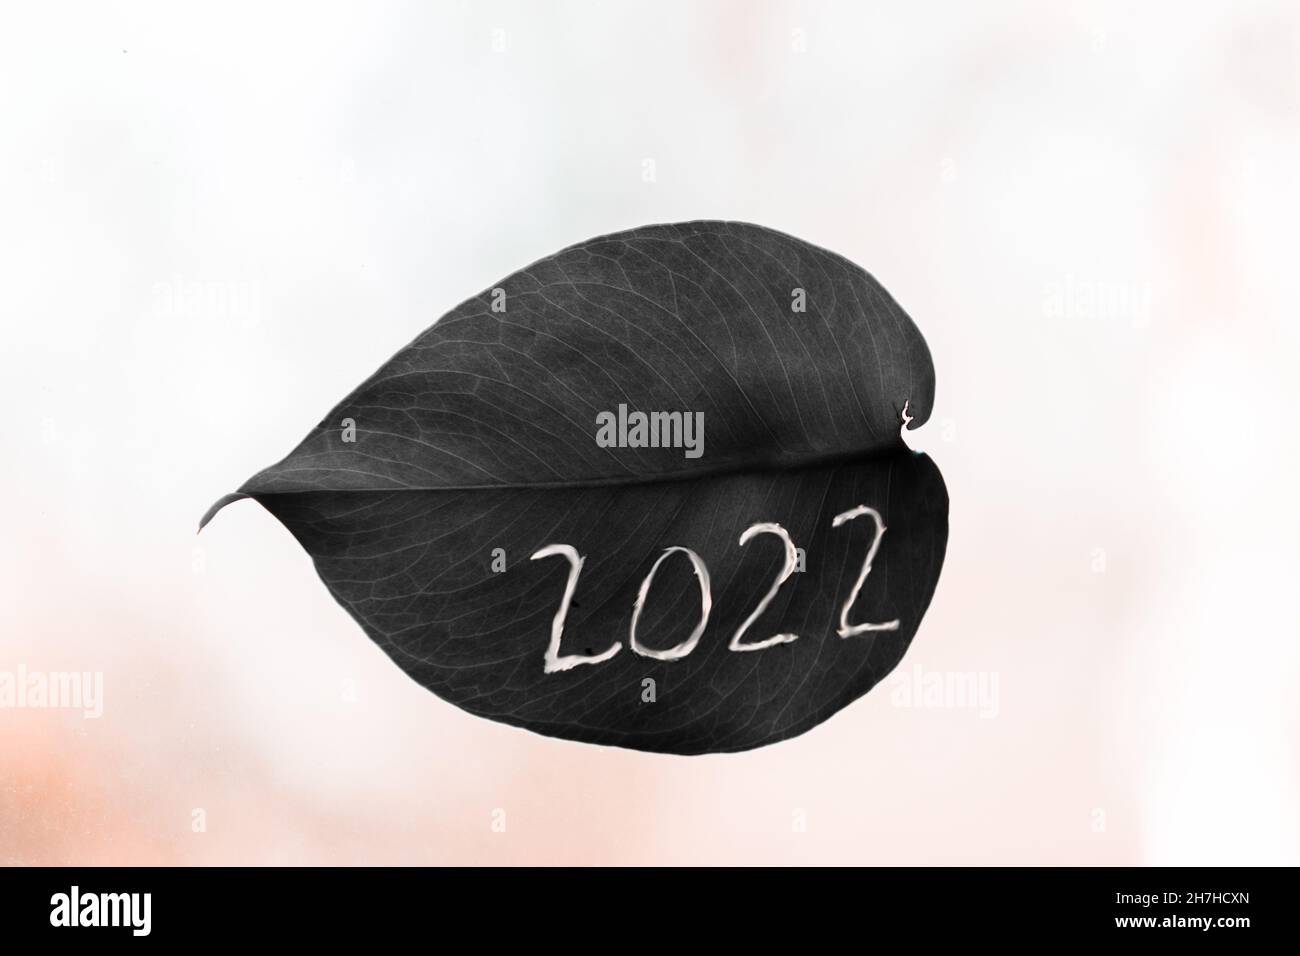 Number 2022. New Year. The number 2022 is carved into a monstera leaf. Stock Photo